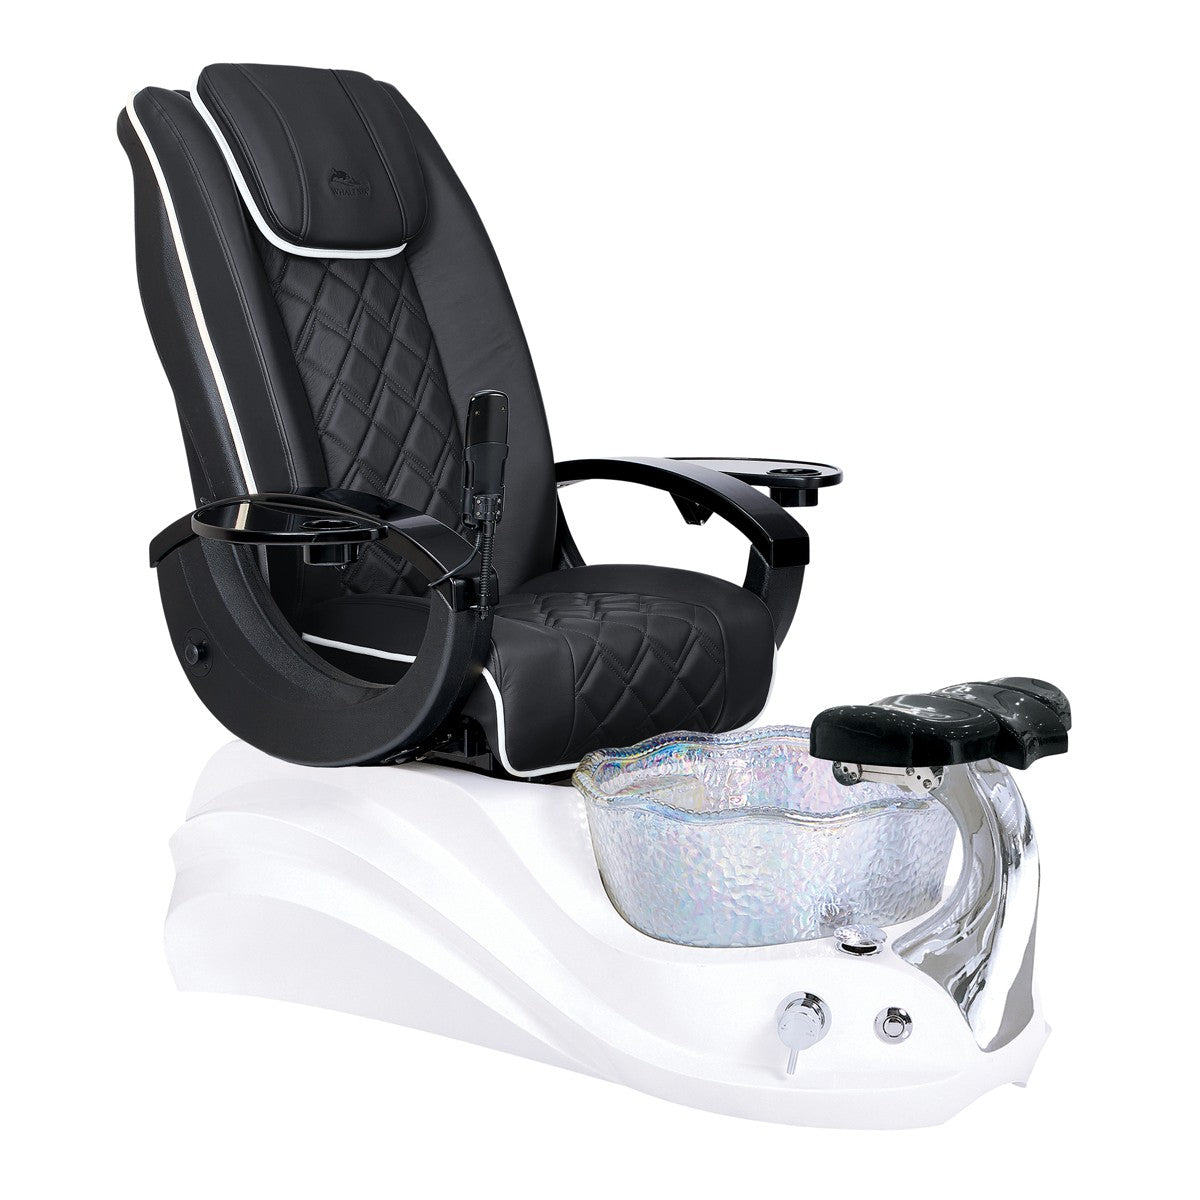 Whale Spa Whale Spa Pedicure Chair Crane with Free Trolley & Tech Stool Pedicure Chair - ChairsThatGive